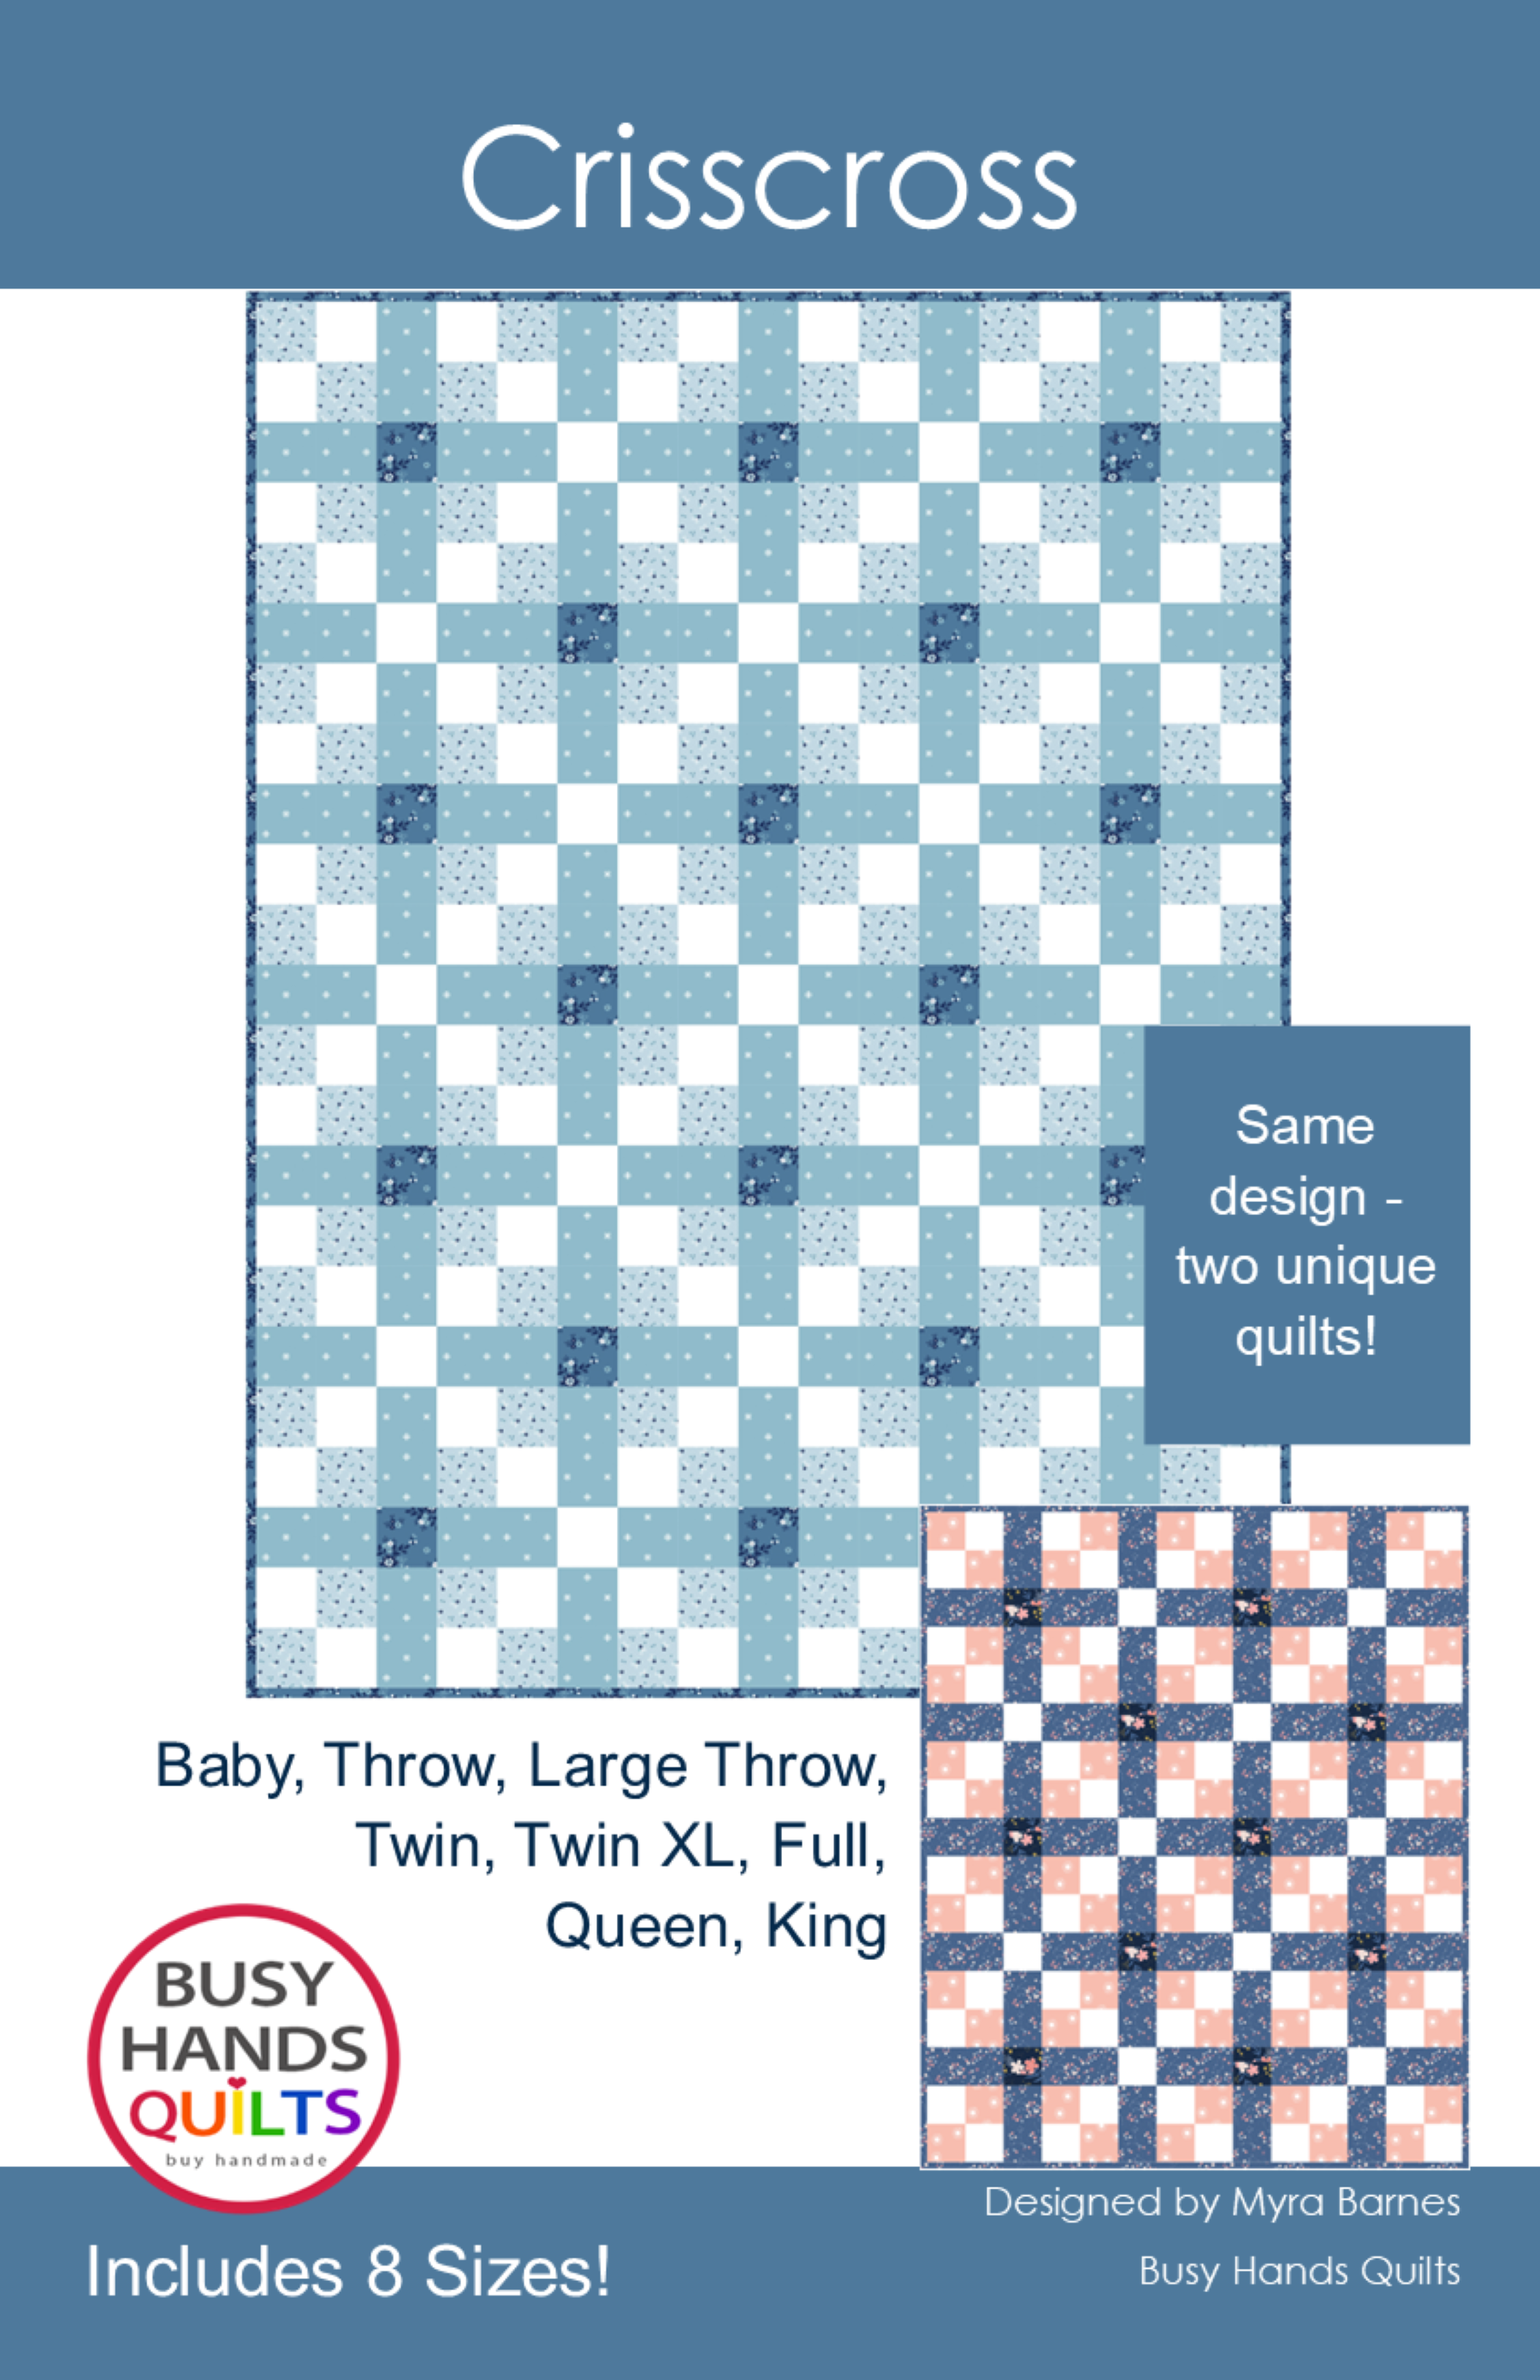 Crisscross Quilt Pattern by Myra Barnes of Busy Hands Quilts